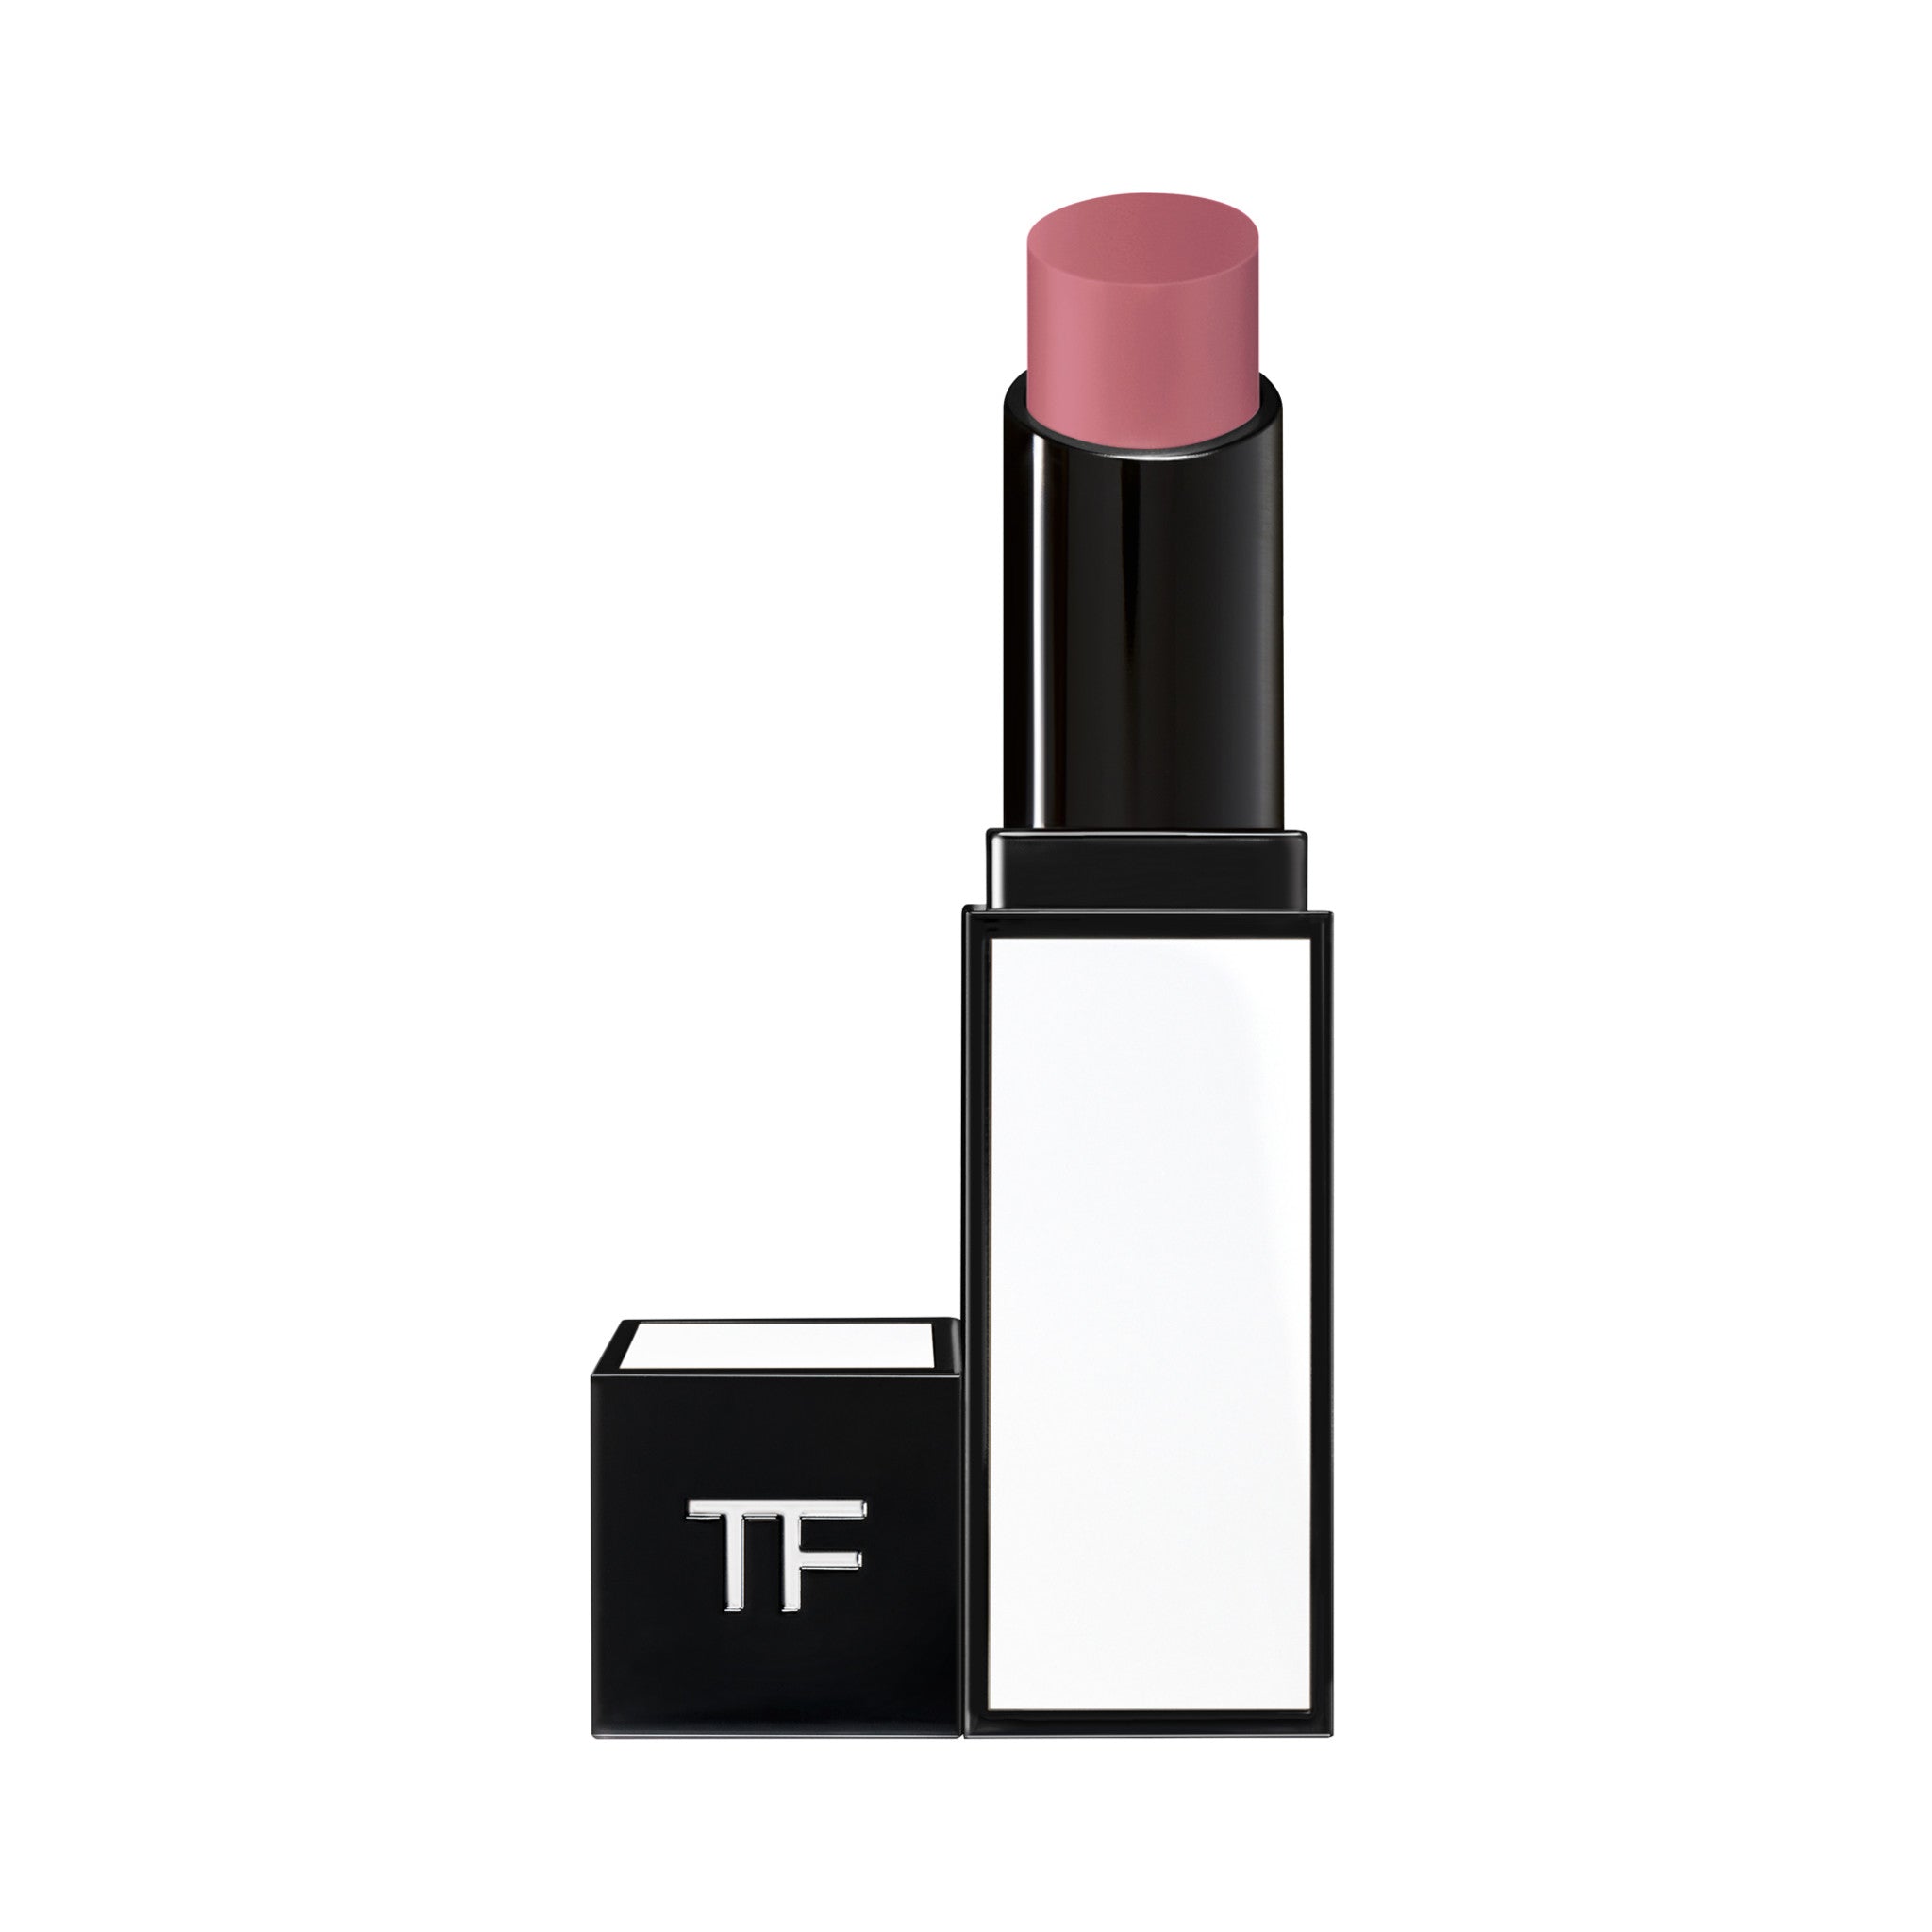 Tom Ford Private Rose Garden Lip Color Satin Matte Color/Shade variant: Intimate Rose main image.